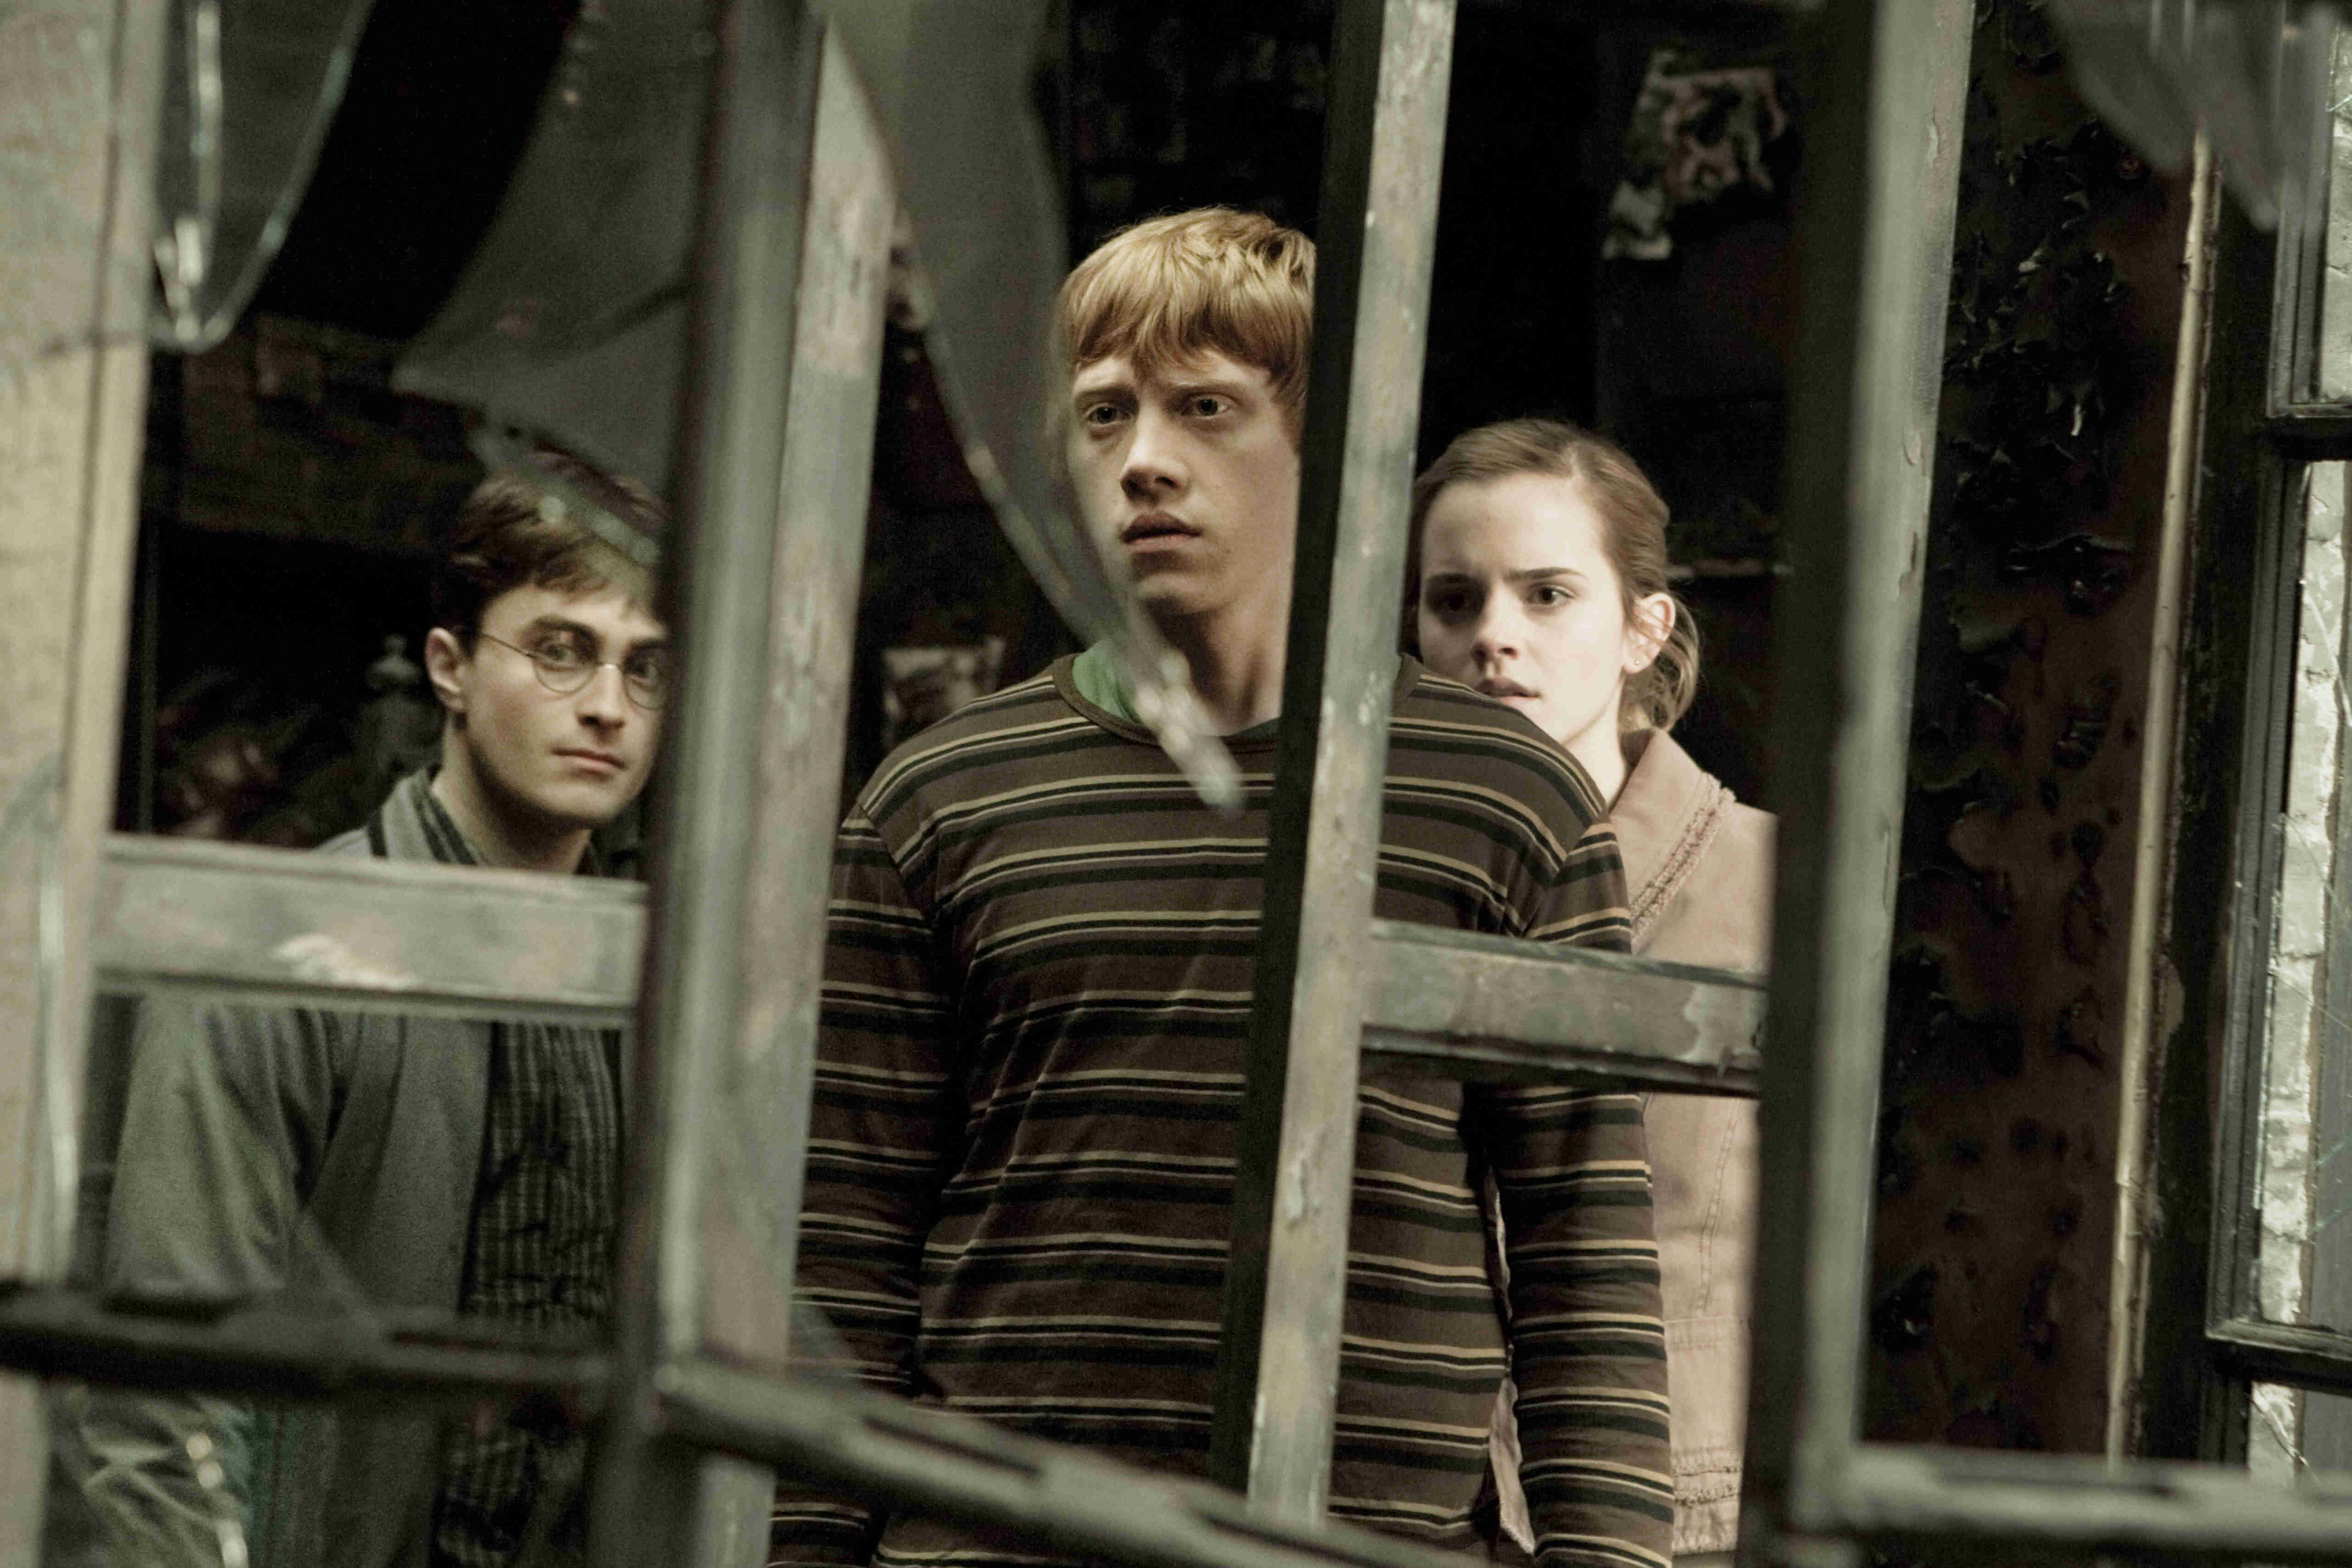 Daniel Radcliffe, Rupert Grint and Emma Watson in Warner Bros Pictures' Harry Potter and the Half-Blood Prince (2009)